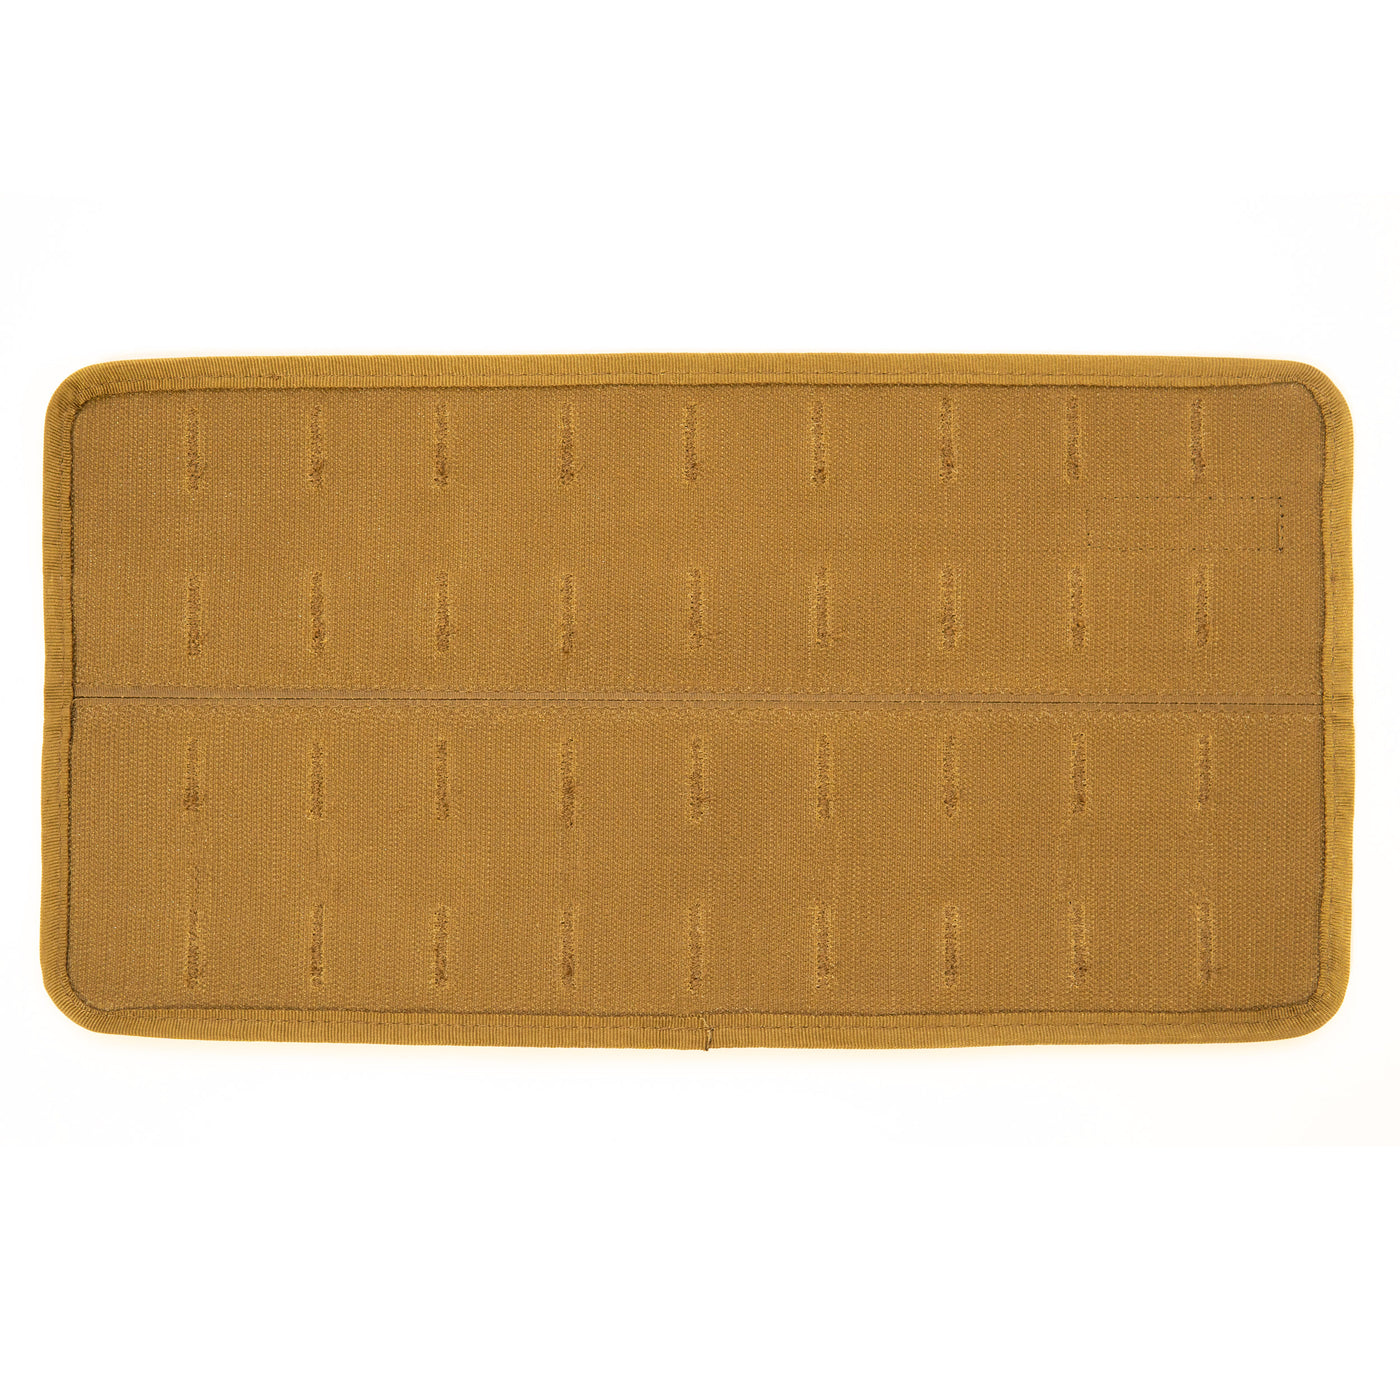 BuiltRight Industries Velcro Tech Panel, Coyote Tan - Large (8 x